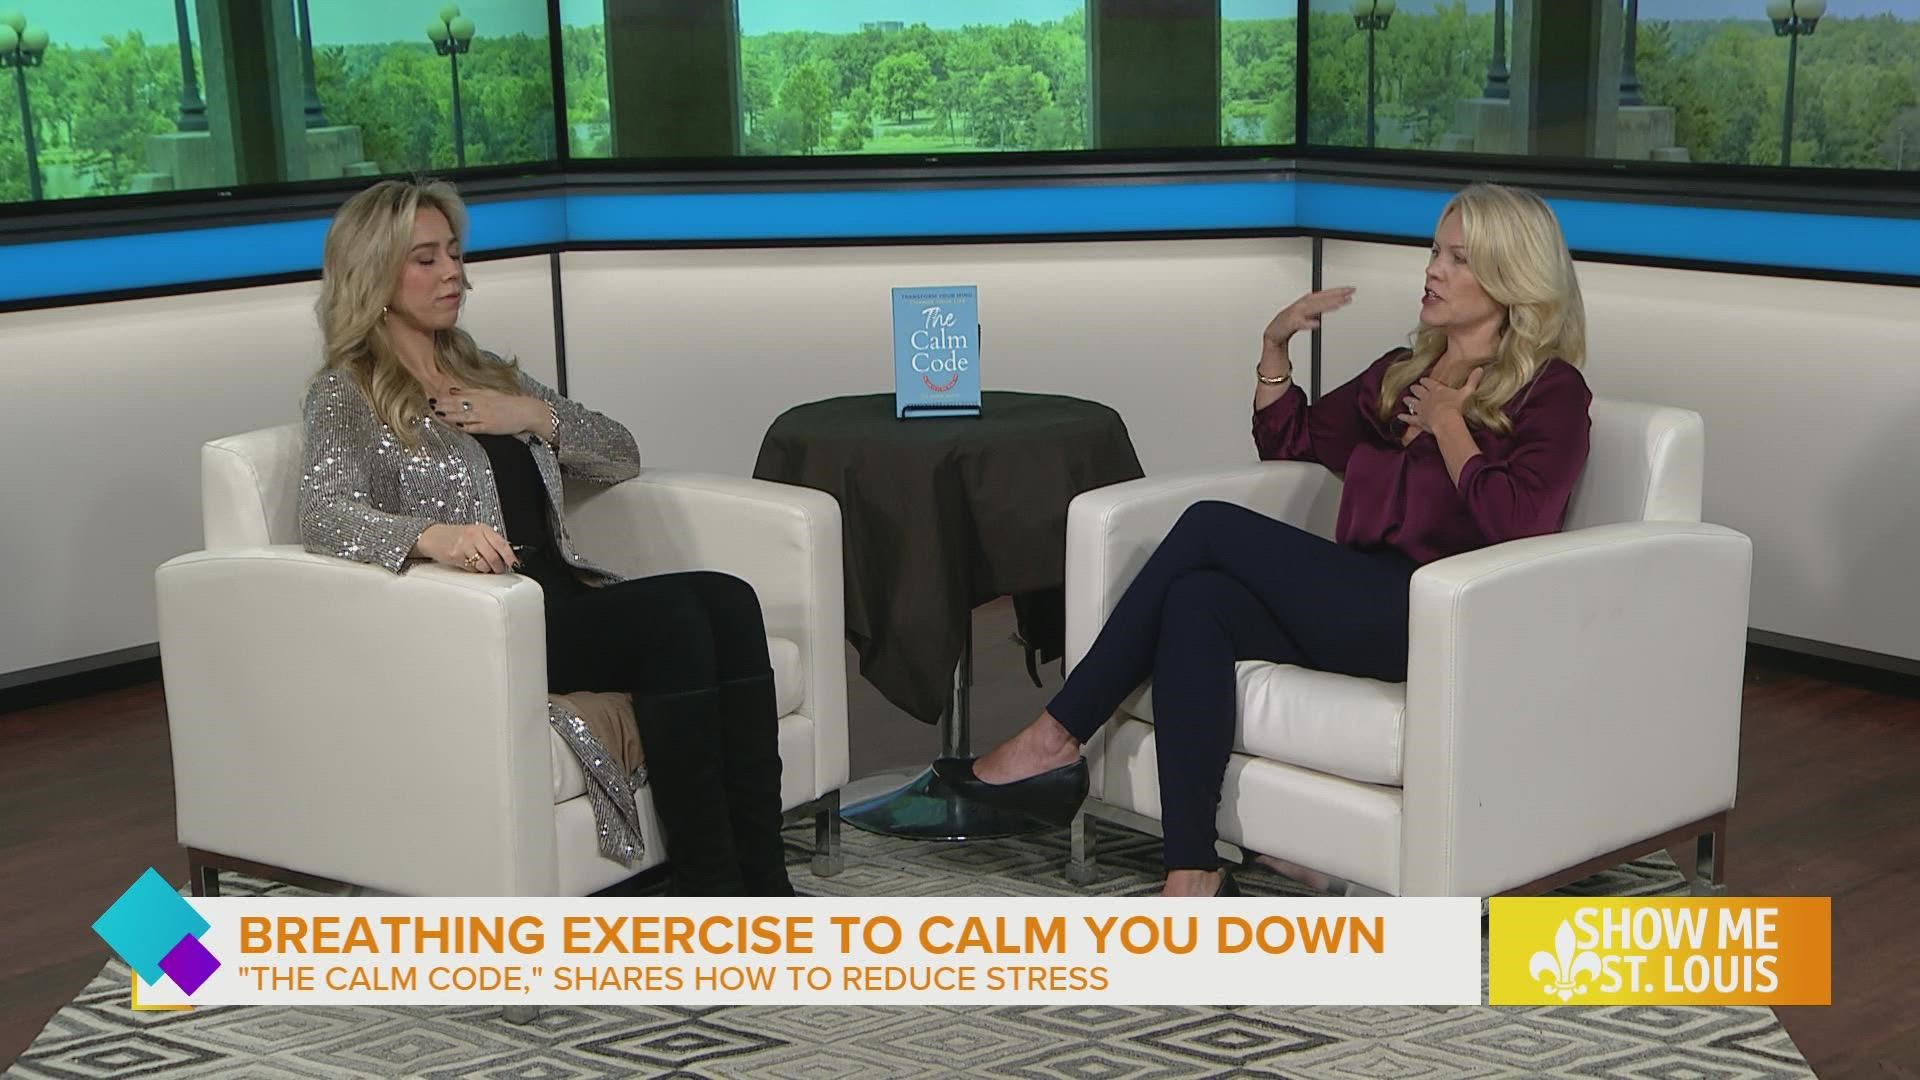 Dr. Annie White stopped by to share her new book, “The Calm Code,” a step-by-step method to reduce stress based on the science of the brain.